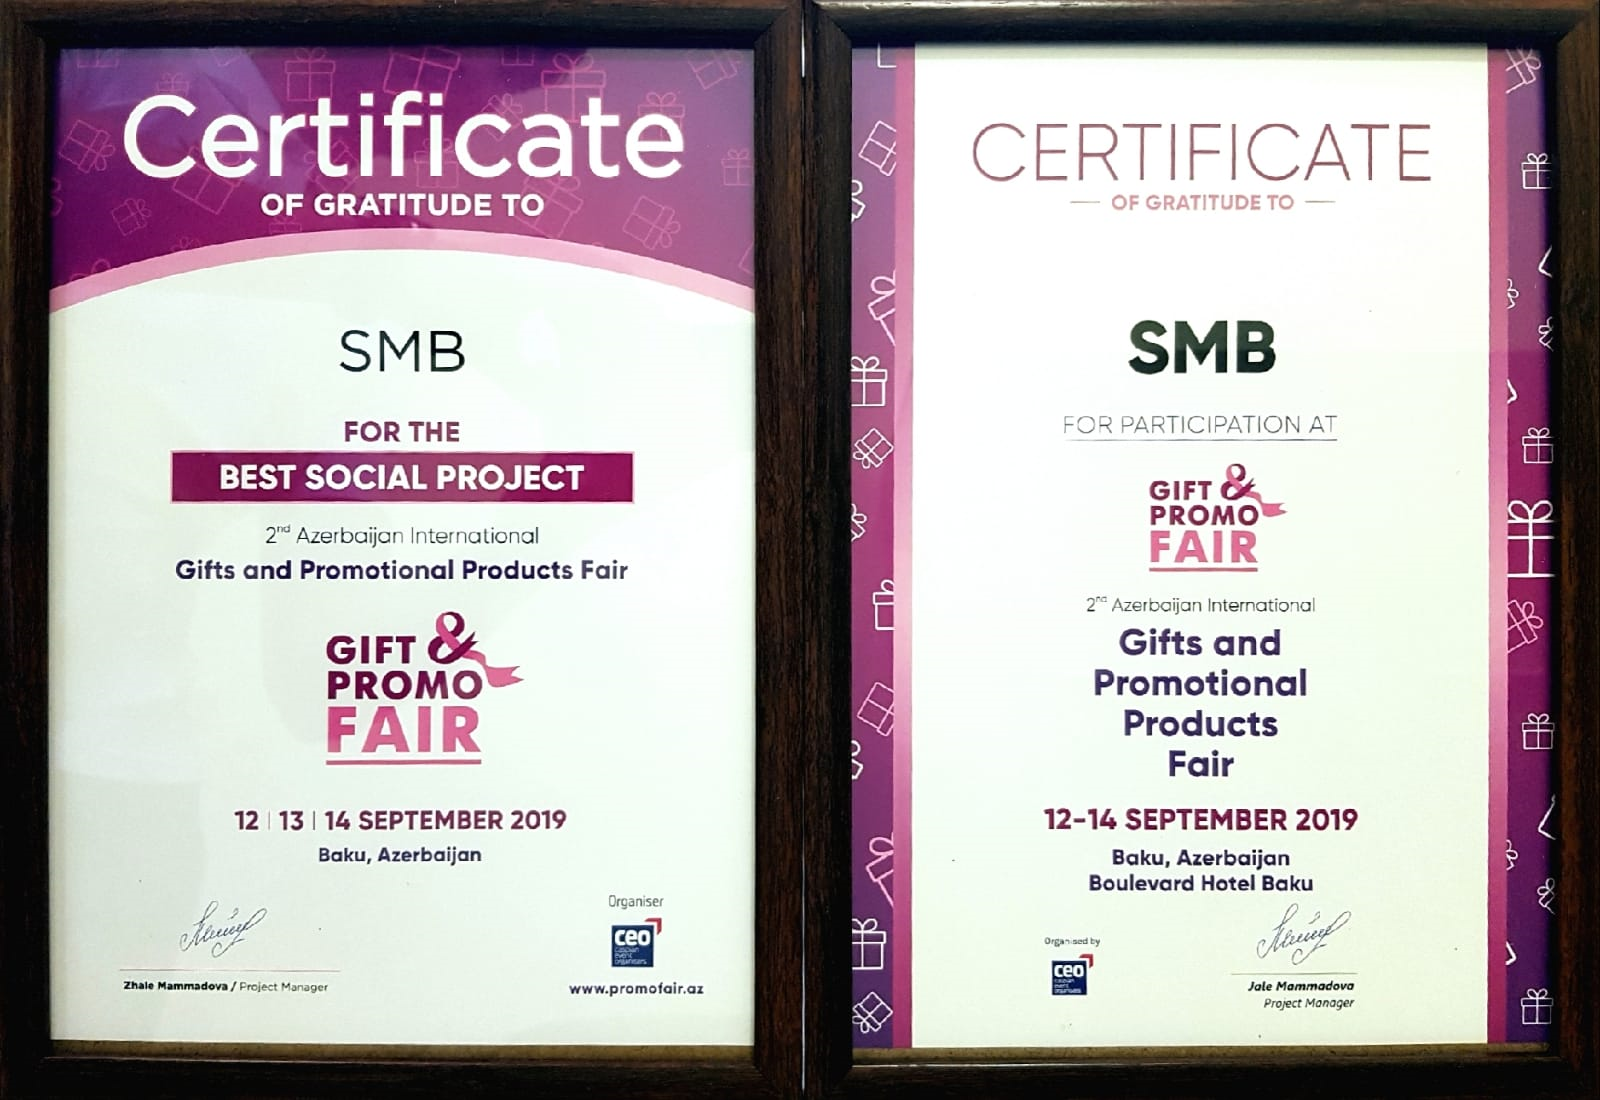 SMBDA stand won “The Best Social Project” award 